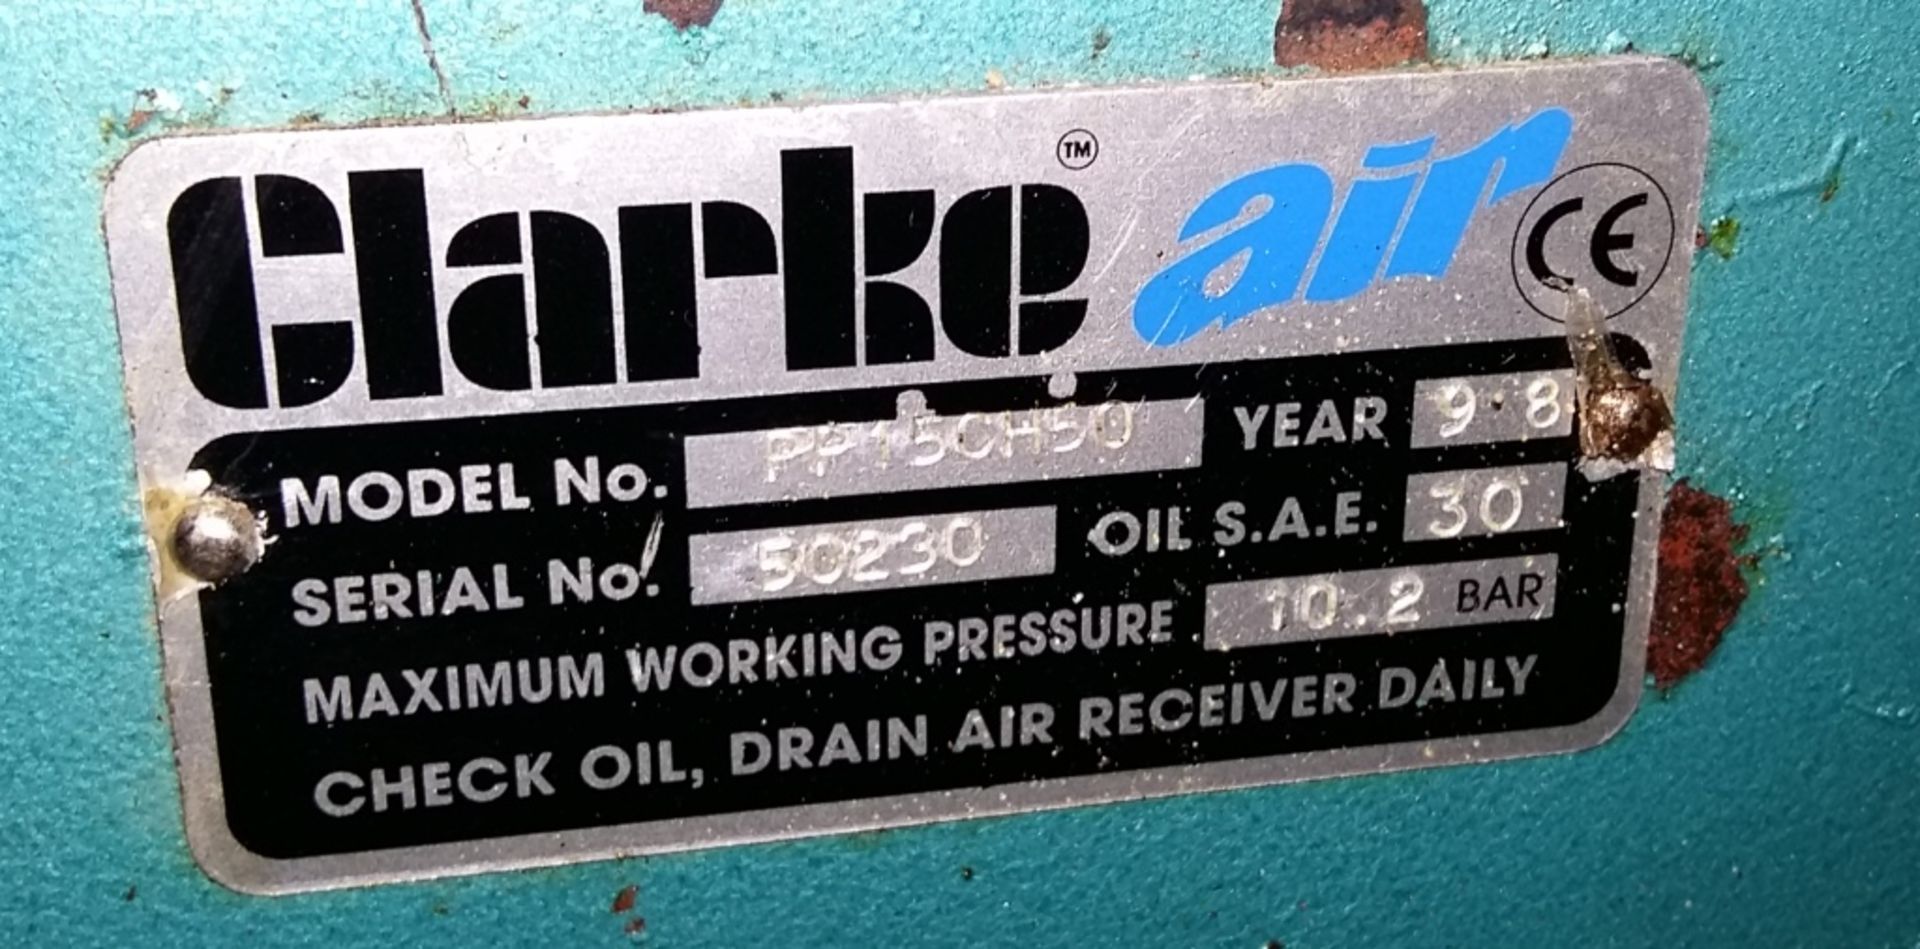 Clarke air industrial compressor - PP15CH50 - 10.2 Bar - Image 2 of 2